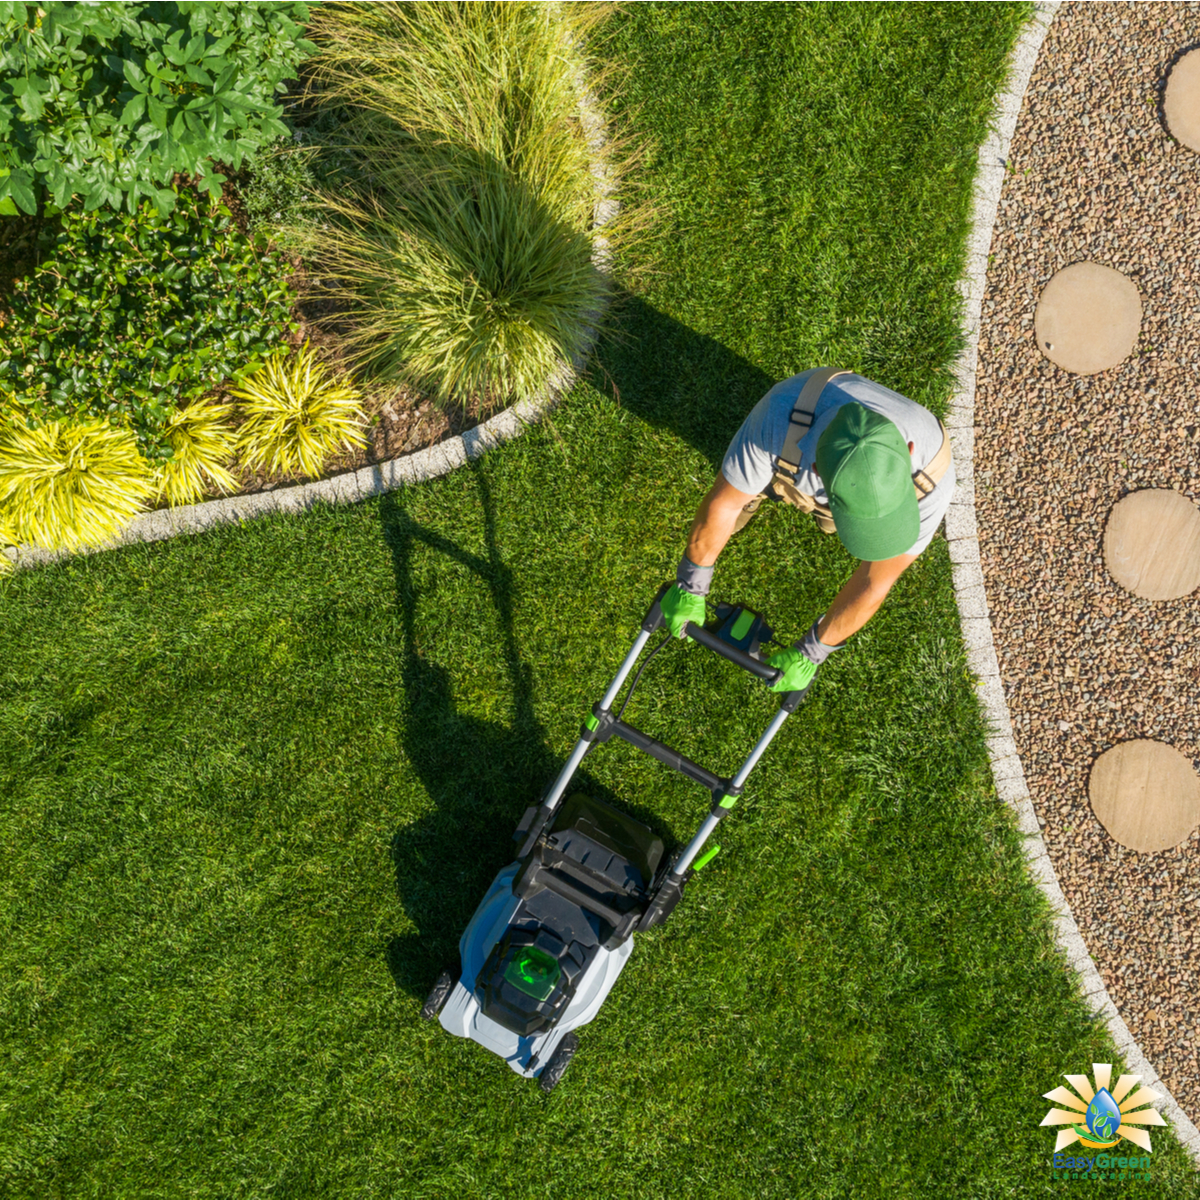 Ready To Design Your New Landscaping? Call Us For Installation In Duvall!